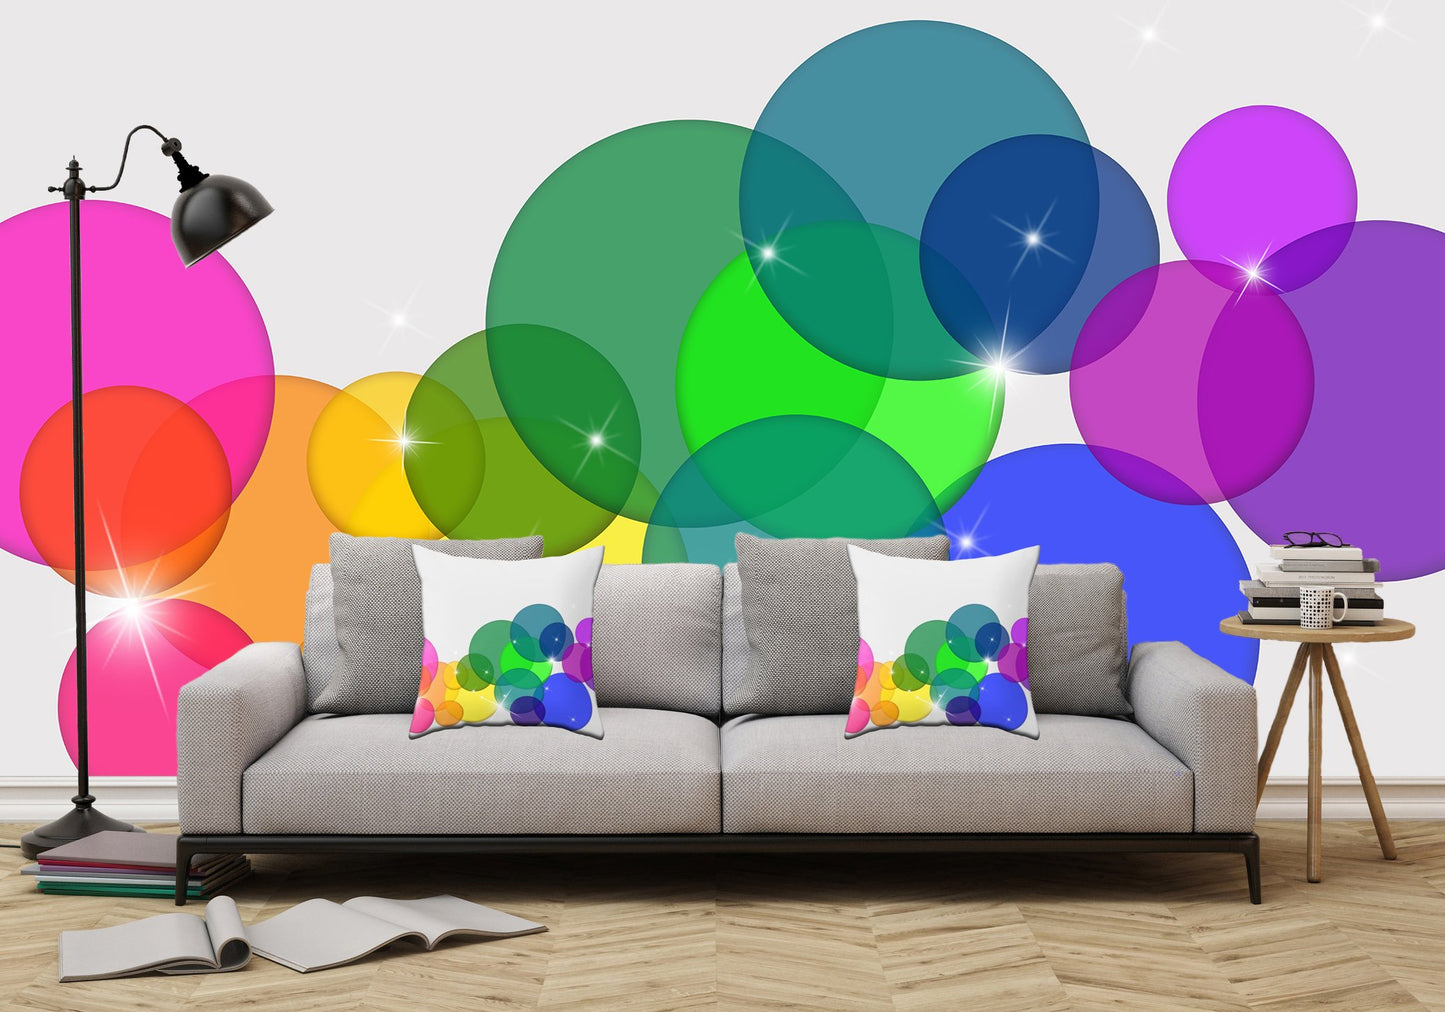 Translucent Rainbow Colored Circles Illustration - Adhesive Wallpaper - Removable Wallpaper - Wall Sticker - Full Size Wall Mural  - PIPAFINEART